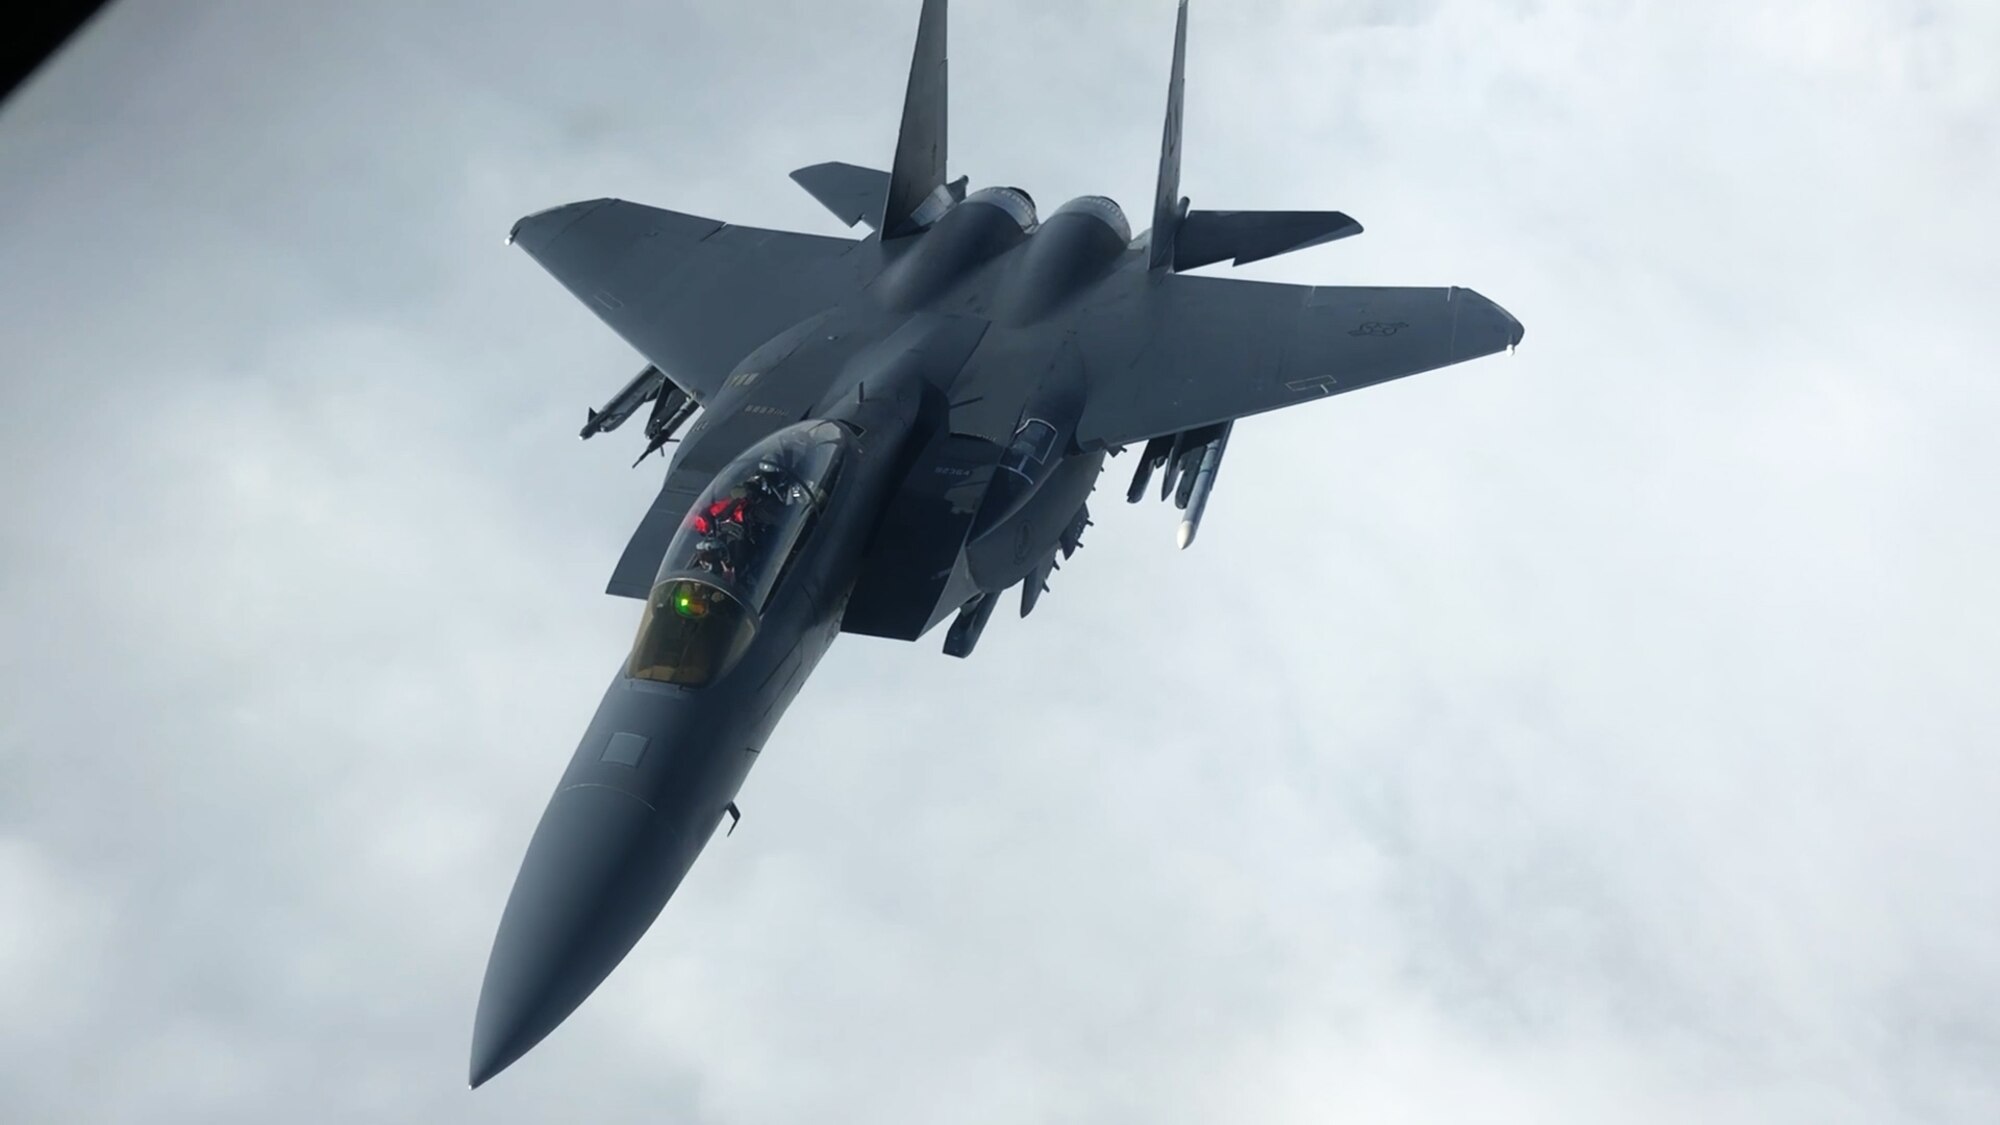 A U.S. Air Force F-15E Strike Eagle with the 48th Fighter Wing from RAF Lakenheath, England, flies behind a U.S. Air Force KC-135 Stratotanker with the 100th Air Refueling Wing from RAF Mildenhall, England, during a deployment to Ӓmari Air Base, Estonia Nov. 1, 2018. Continual interaction between the U.S. and Estonia strengthens overall coordination during times of crisis or security threats. (U.S. Air Force photo by Senior Airman Kelly O’Connor)